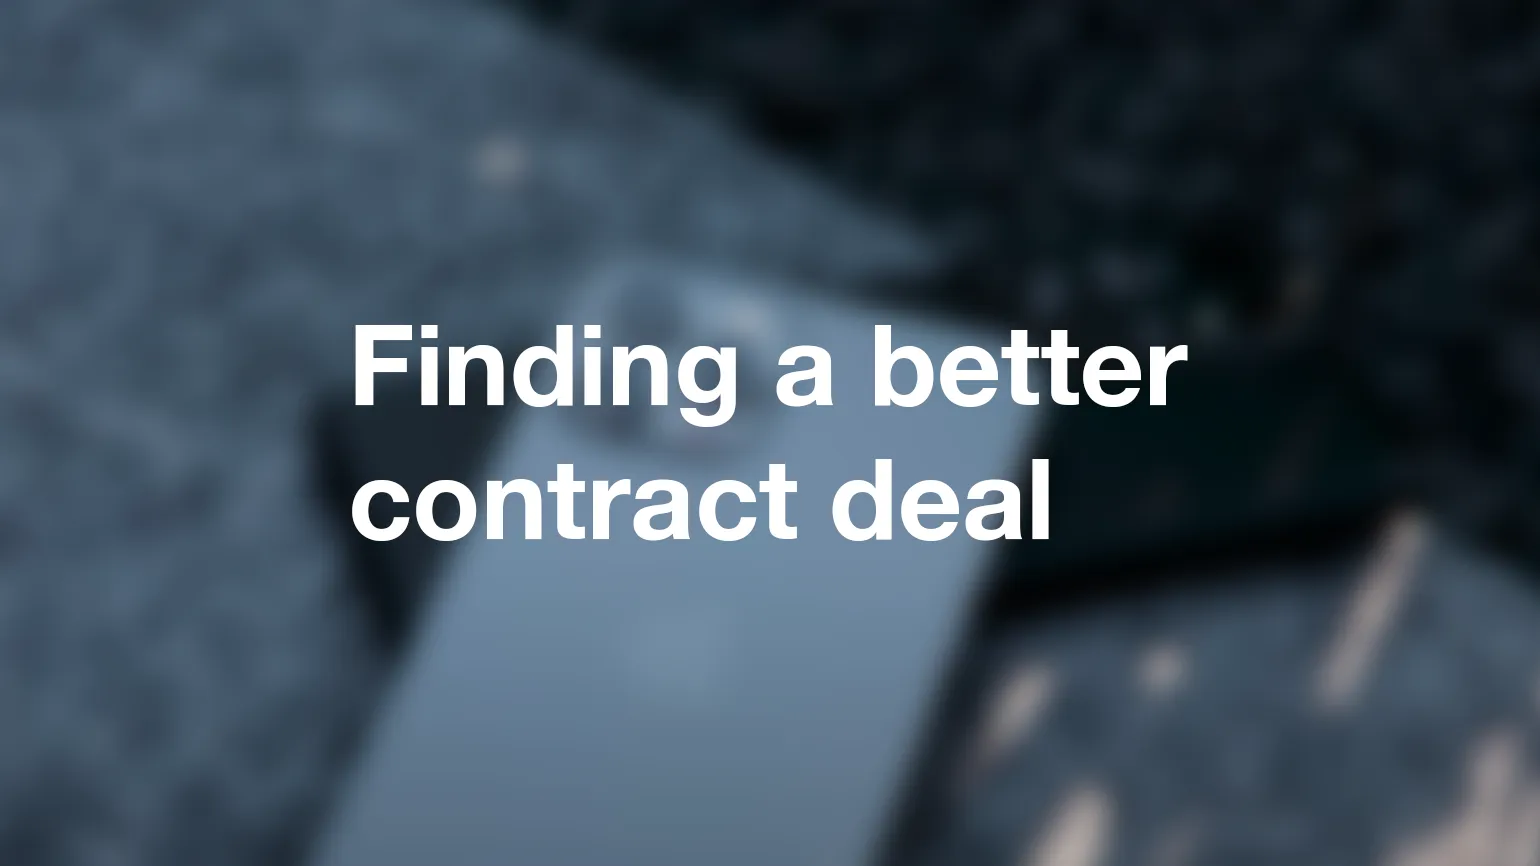 Finding a better contract deal